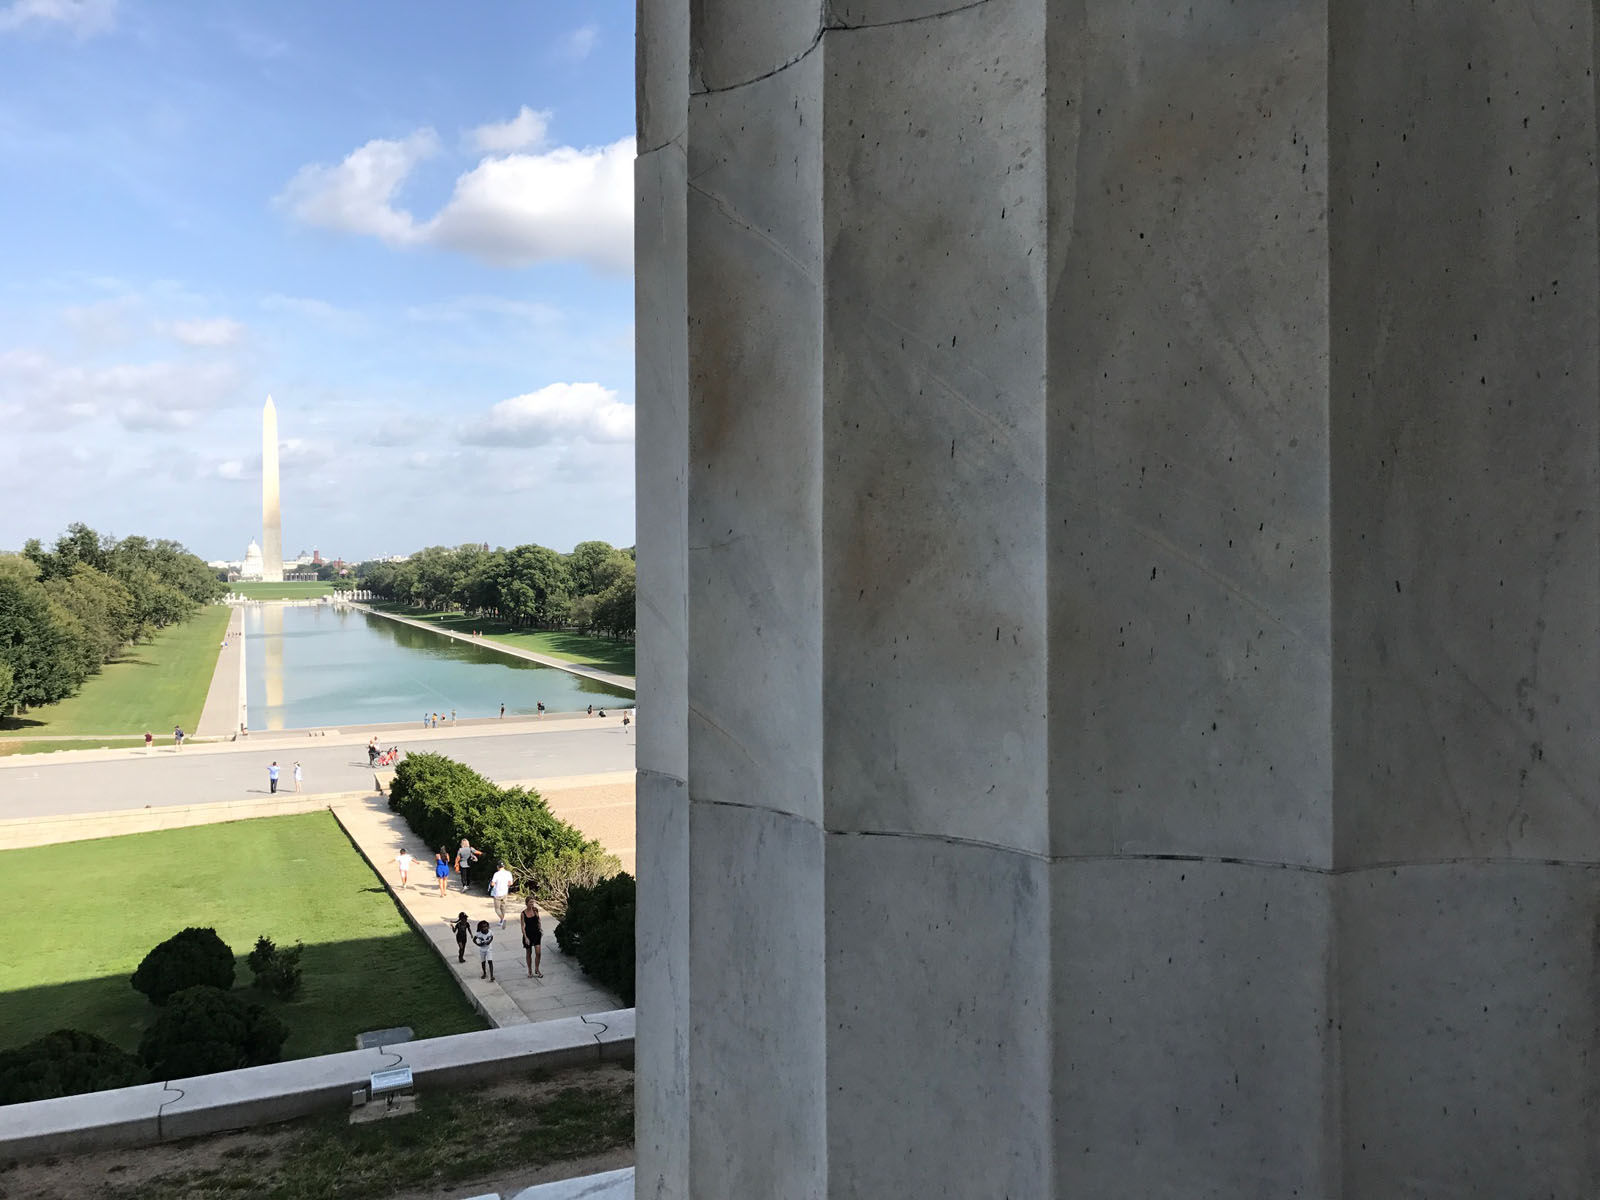 A man was charged Sunday, September 18 for damaging the Lincoln Memorial by carving his name in a stone pillar. (Megan Cloherty/WTOP)